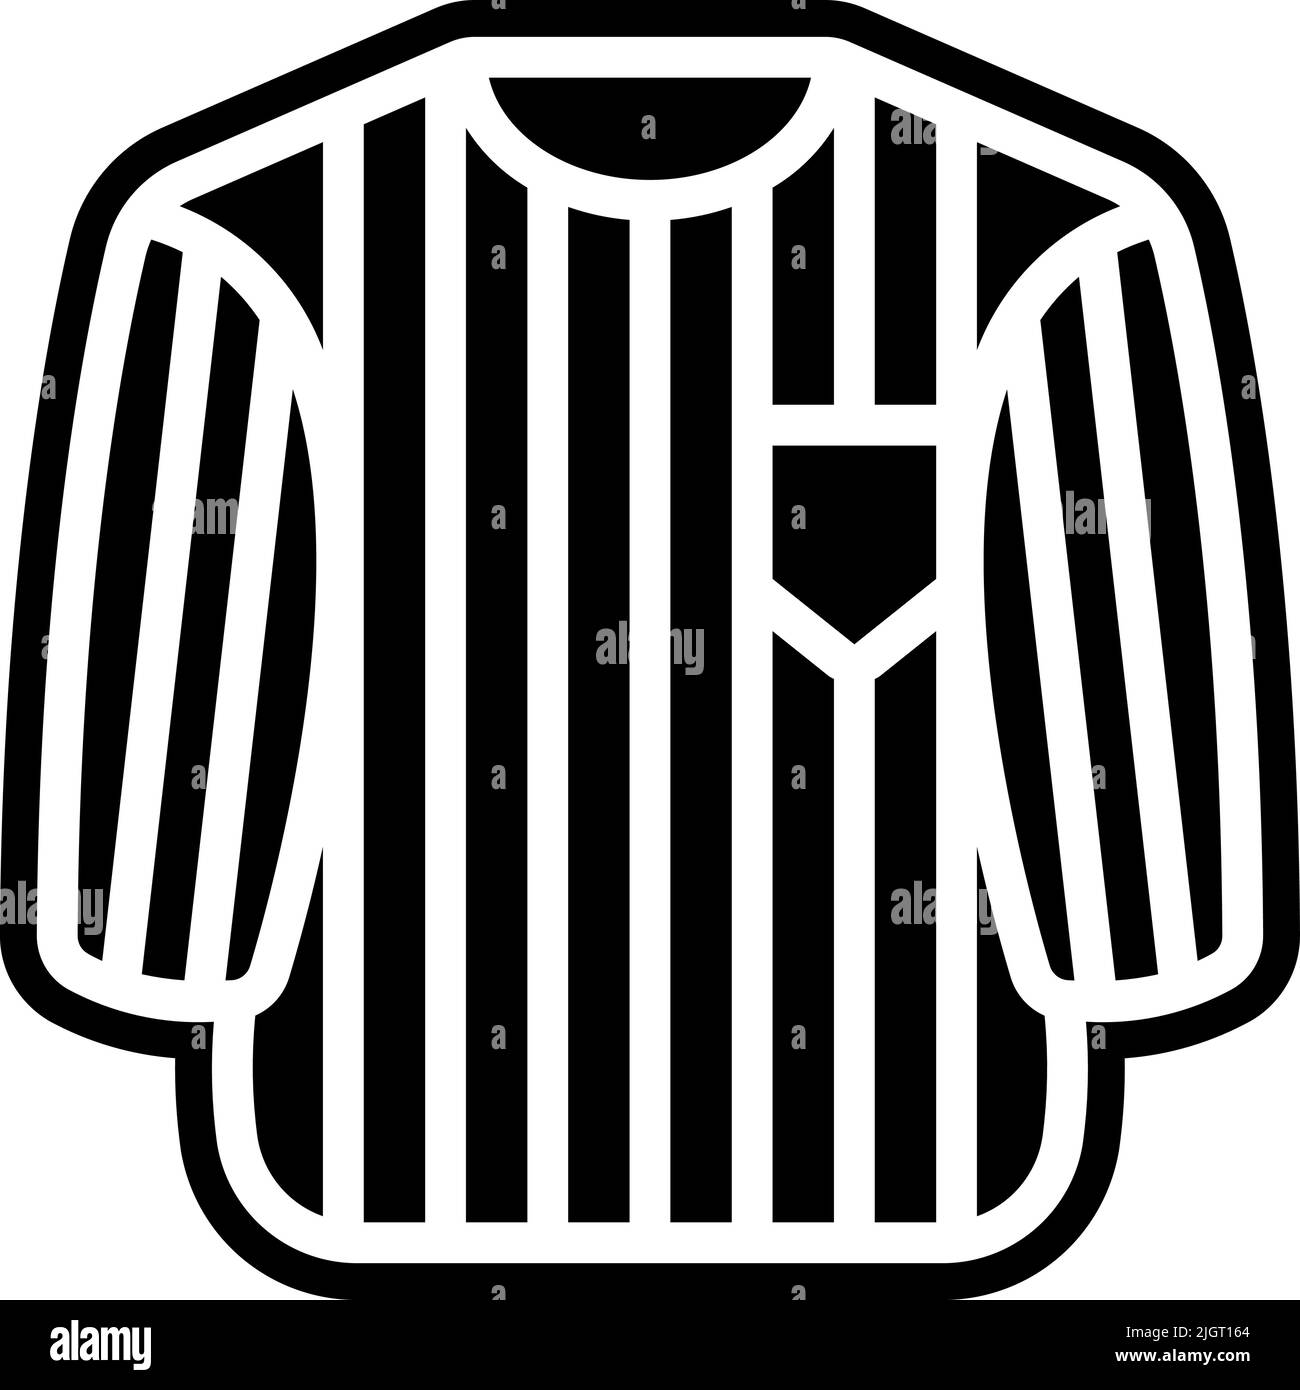 referee jersey football clipart - Google Search  Referee shirts, Football  referee, Shirt clipart